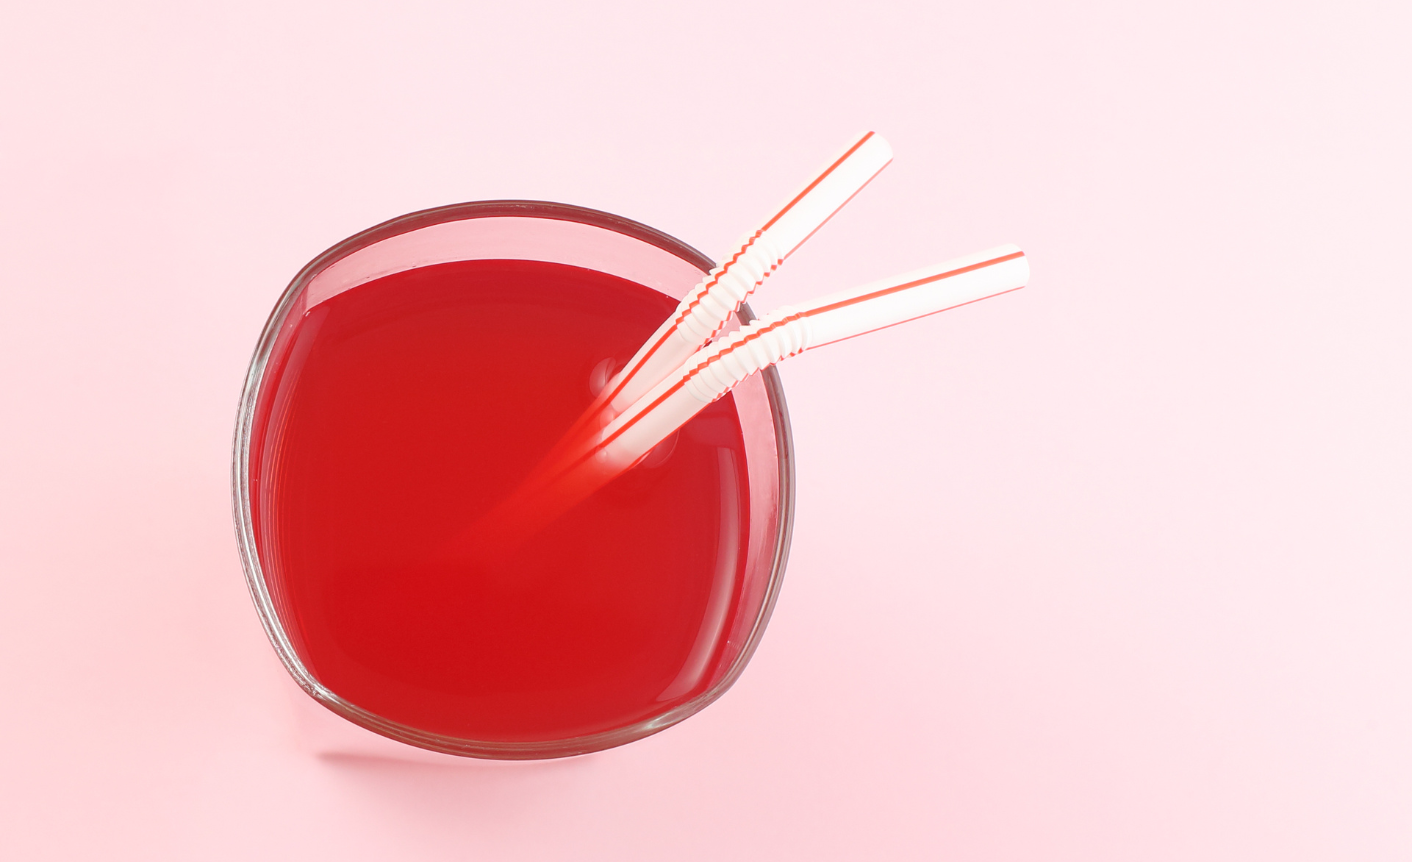 On a light pink background a class of red juice has two straws coming out of it to symbolize how to merge two brands.